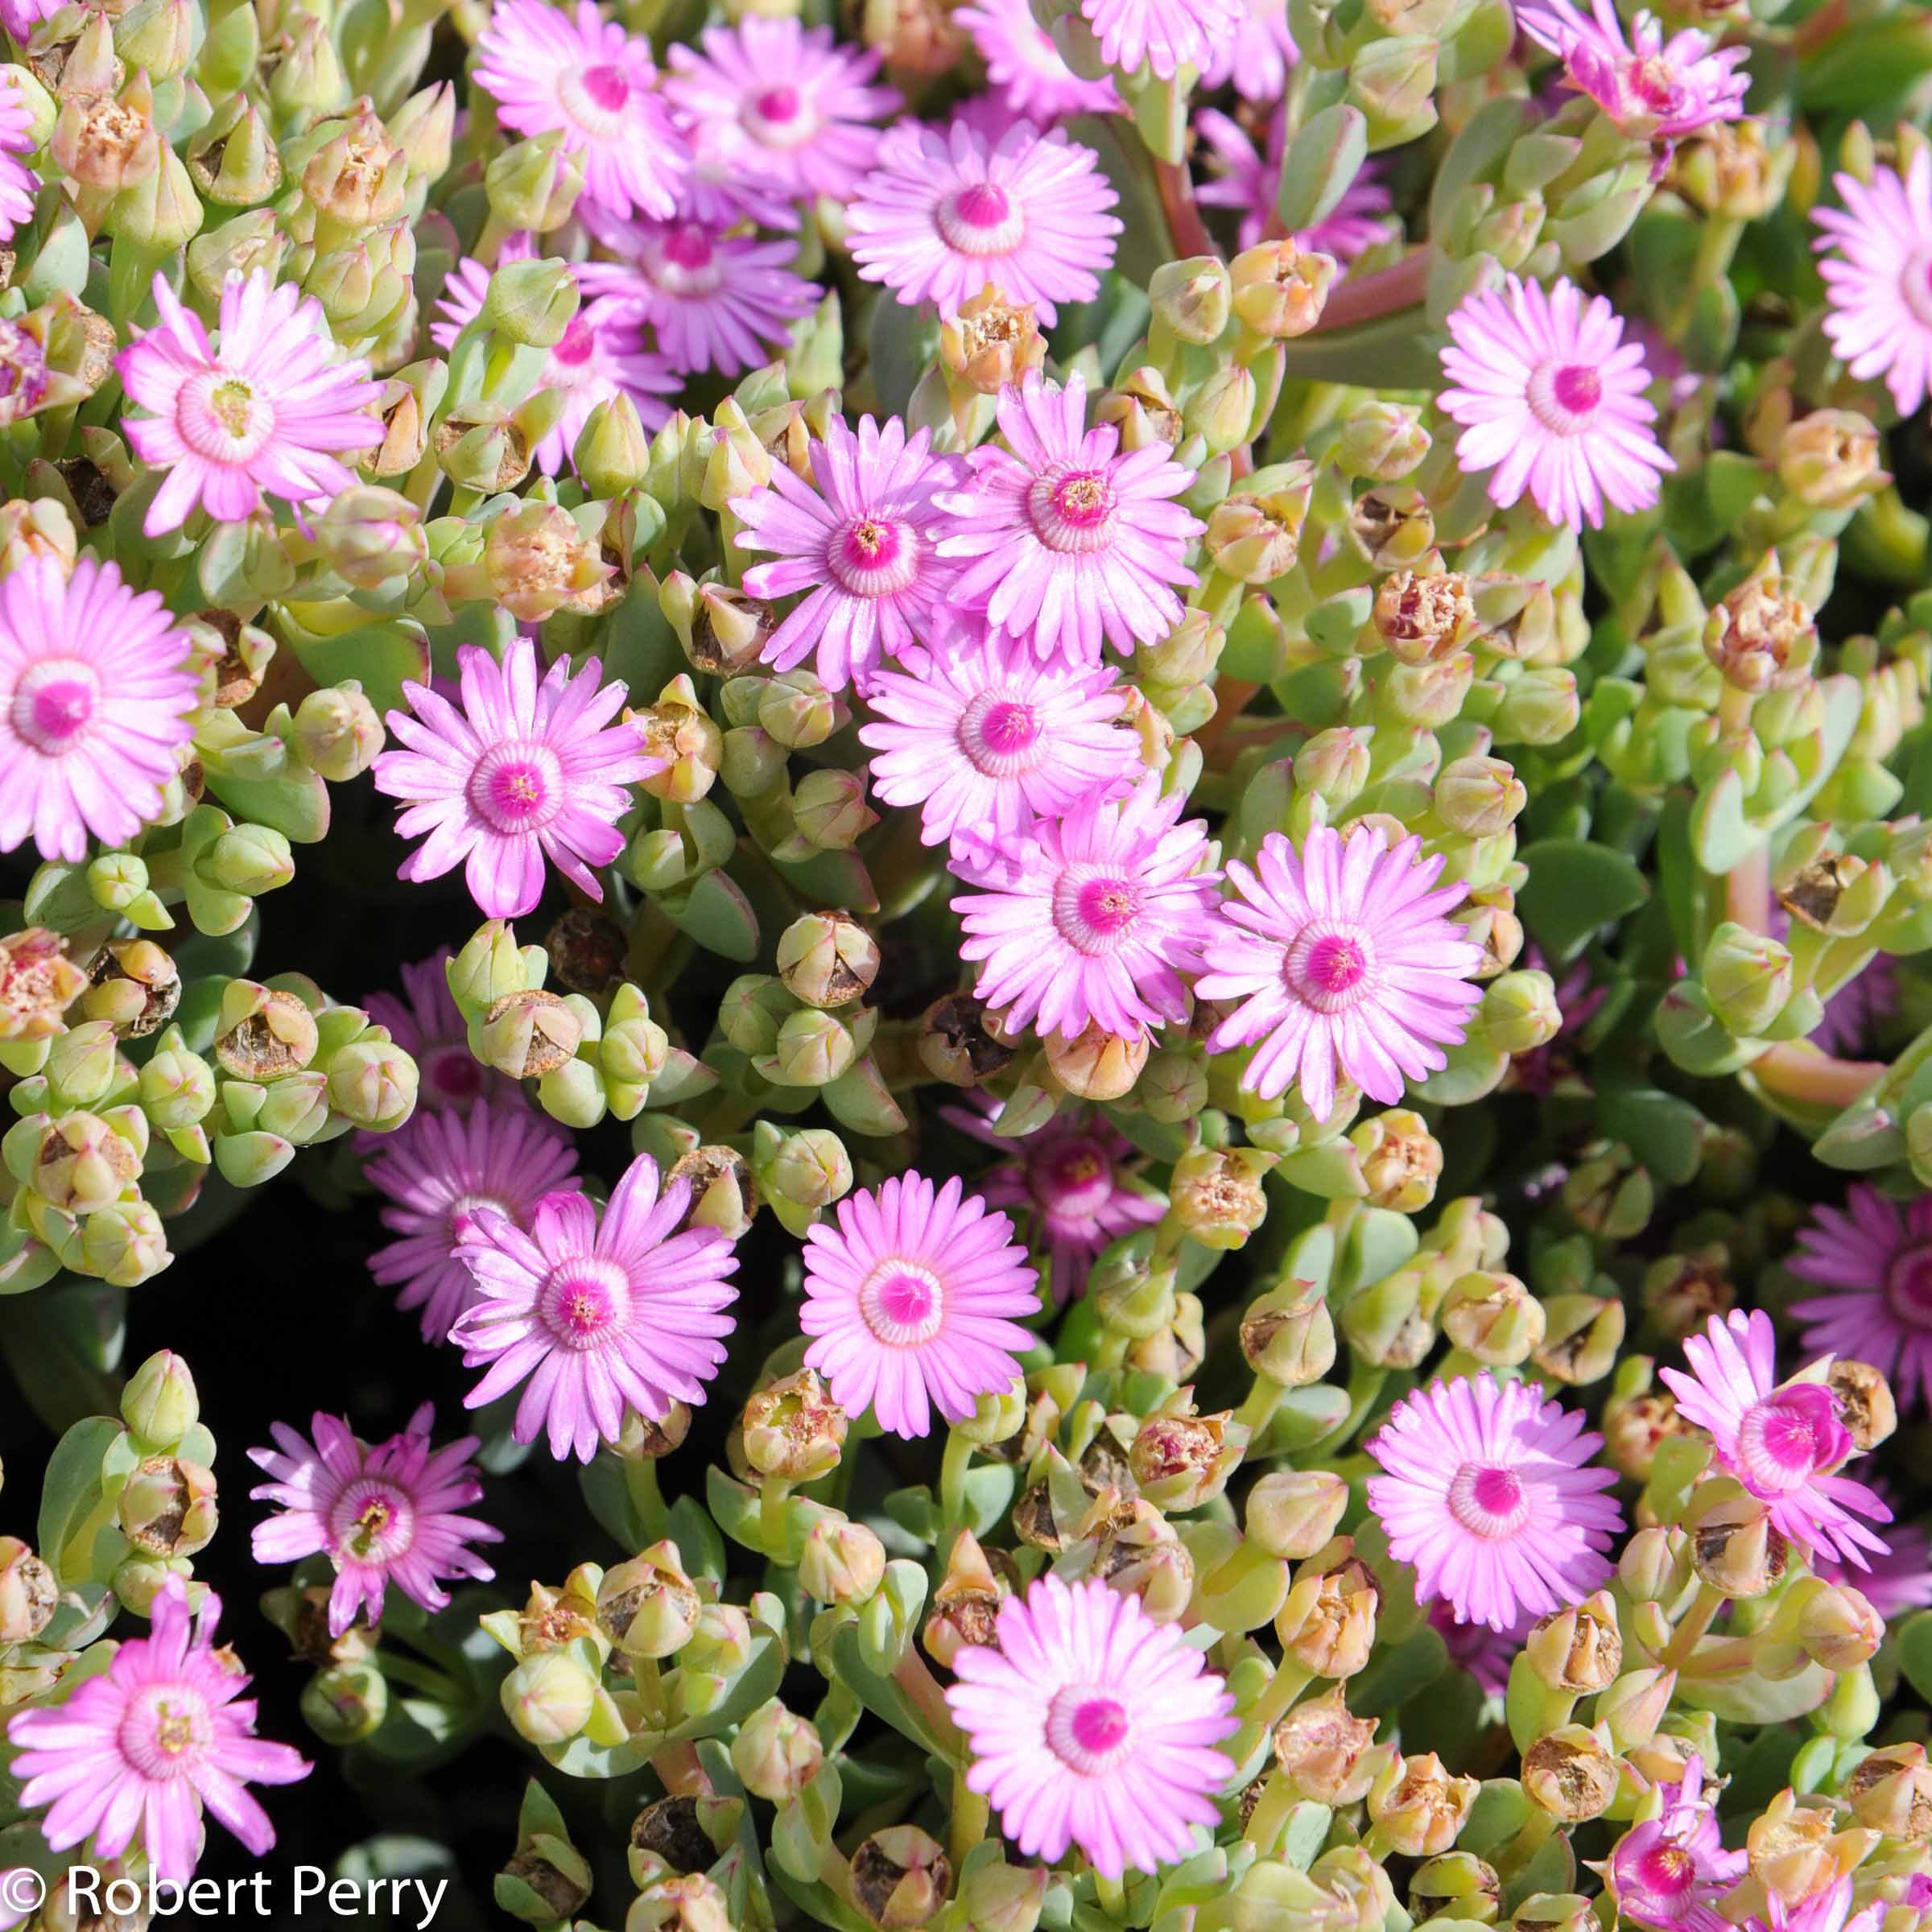 Pink ice plant - Waterwise Planner